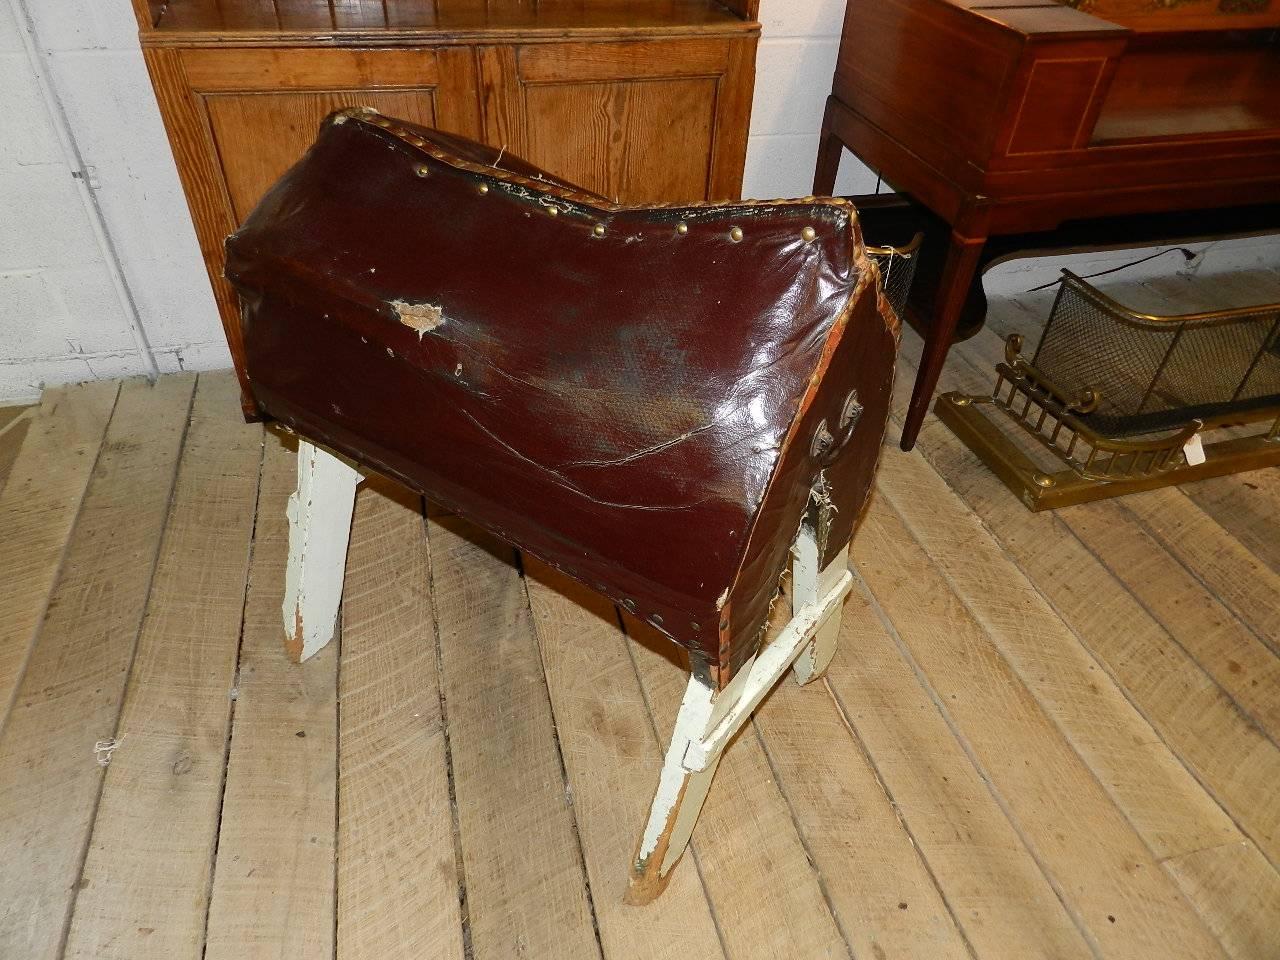 Antique leather covered stand from a former saddlery in Sandon, England. This unique piece was used for trying out breeches and also for a saddle stand.